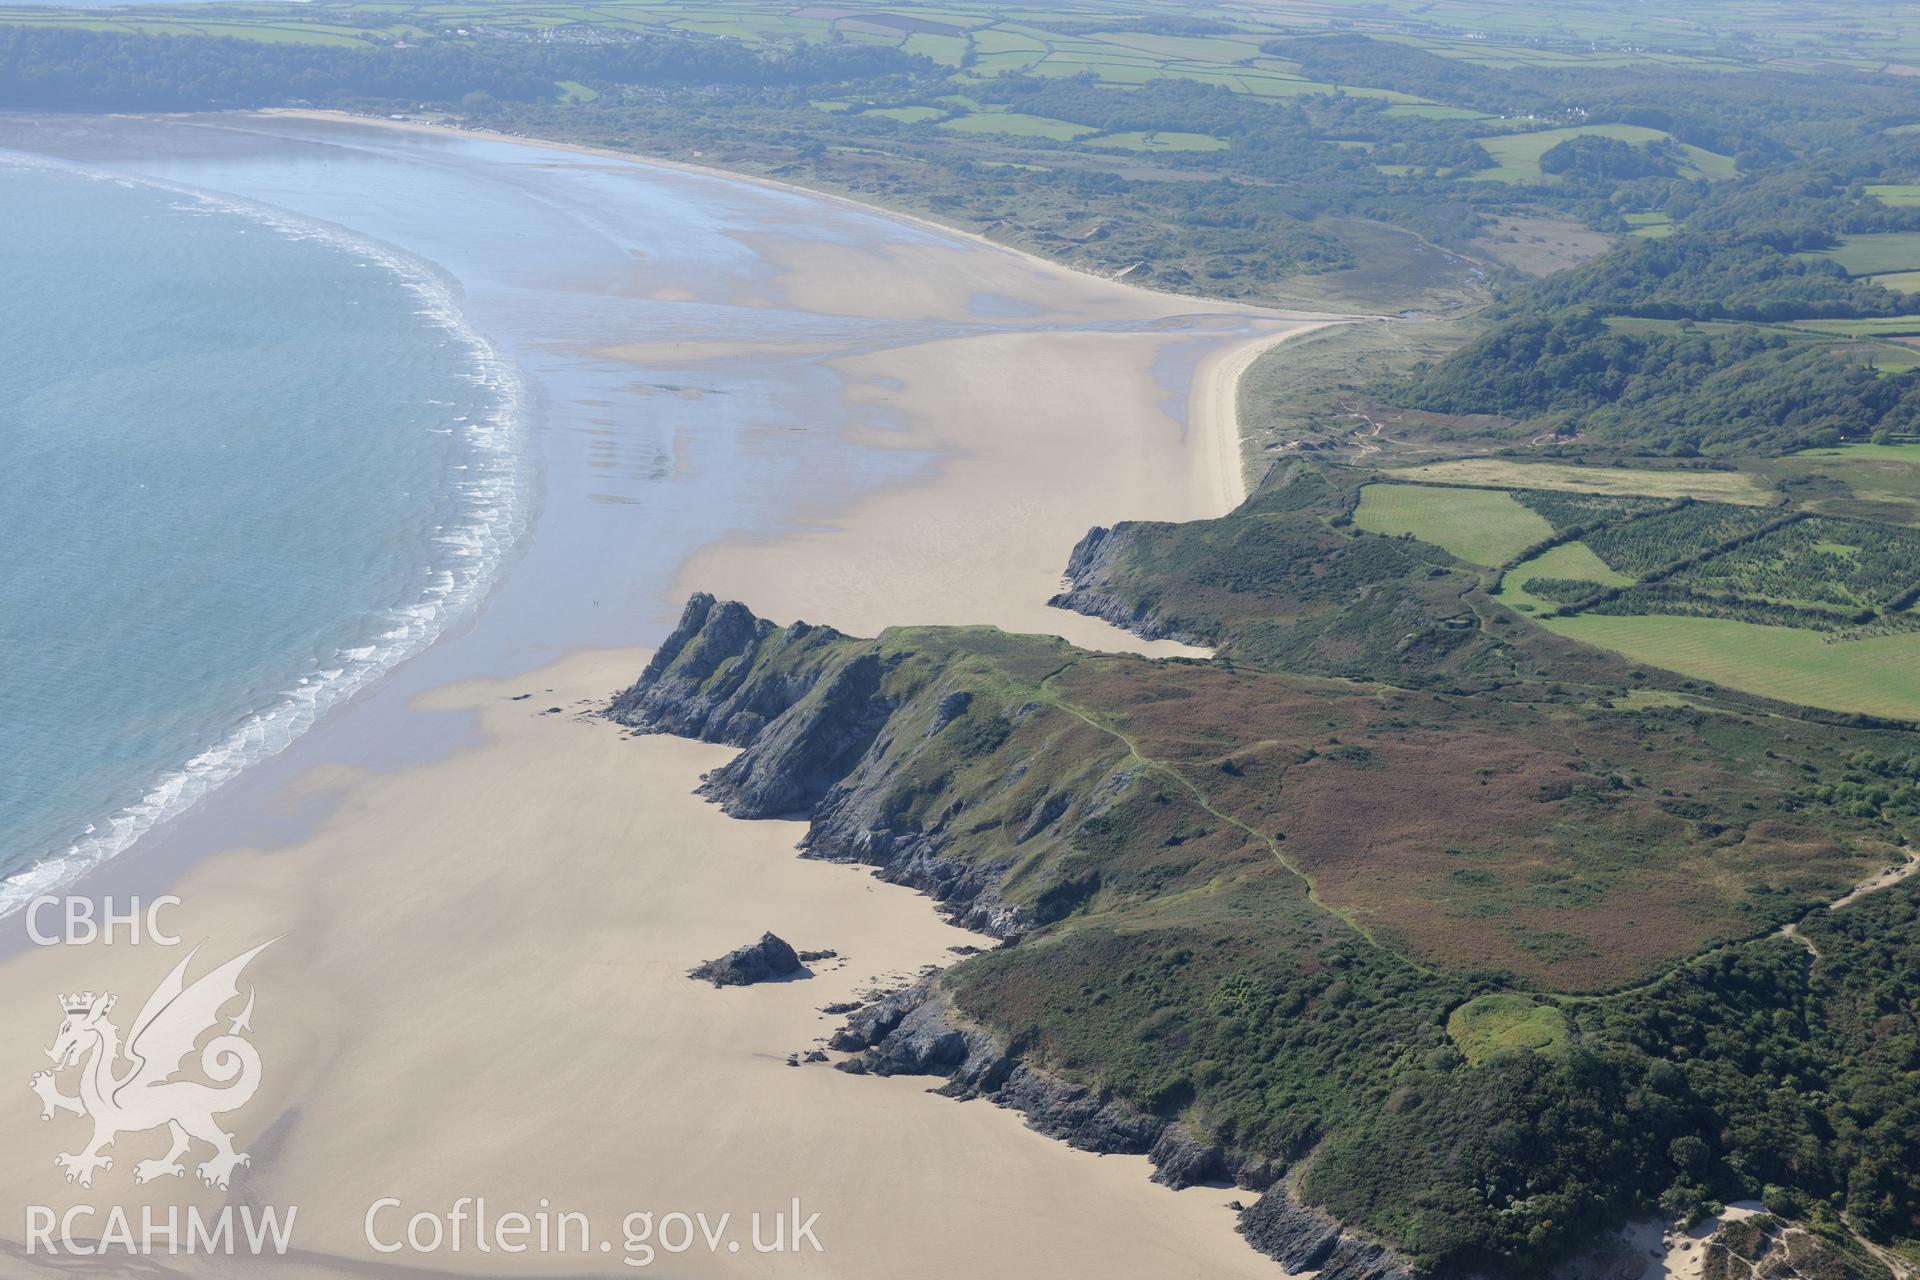 Castle Tower and Three Cliffs Bay landing point, on the southern coast of the Gower Peninsula. Oblique aerial photograph taken during the Royal Commission's programme of archaeological aerial reconnaissance by Toby Driver on 30th September 2015.